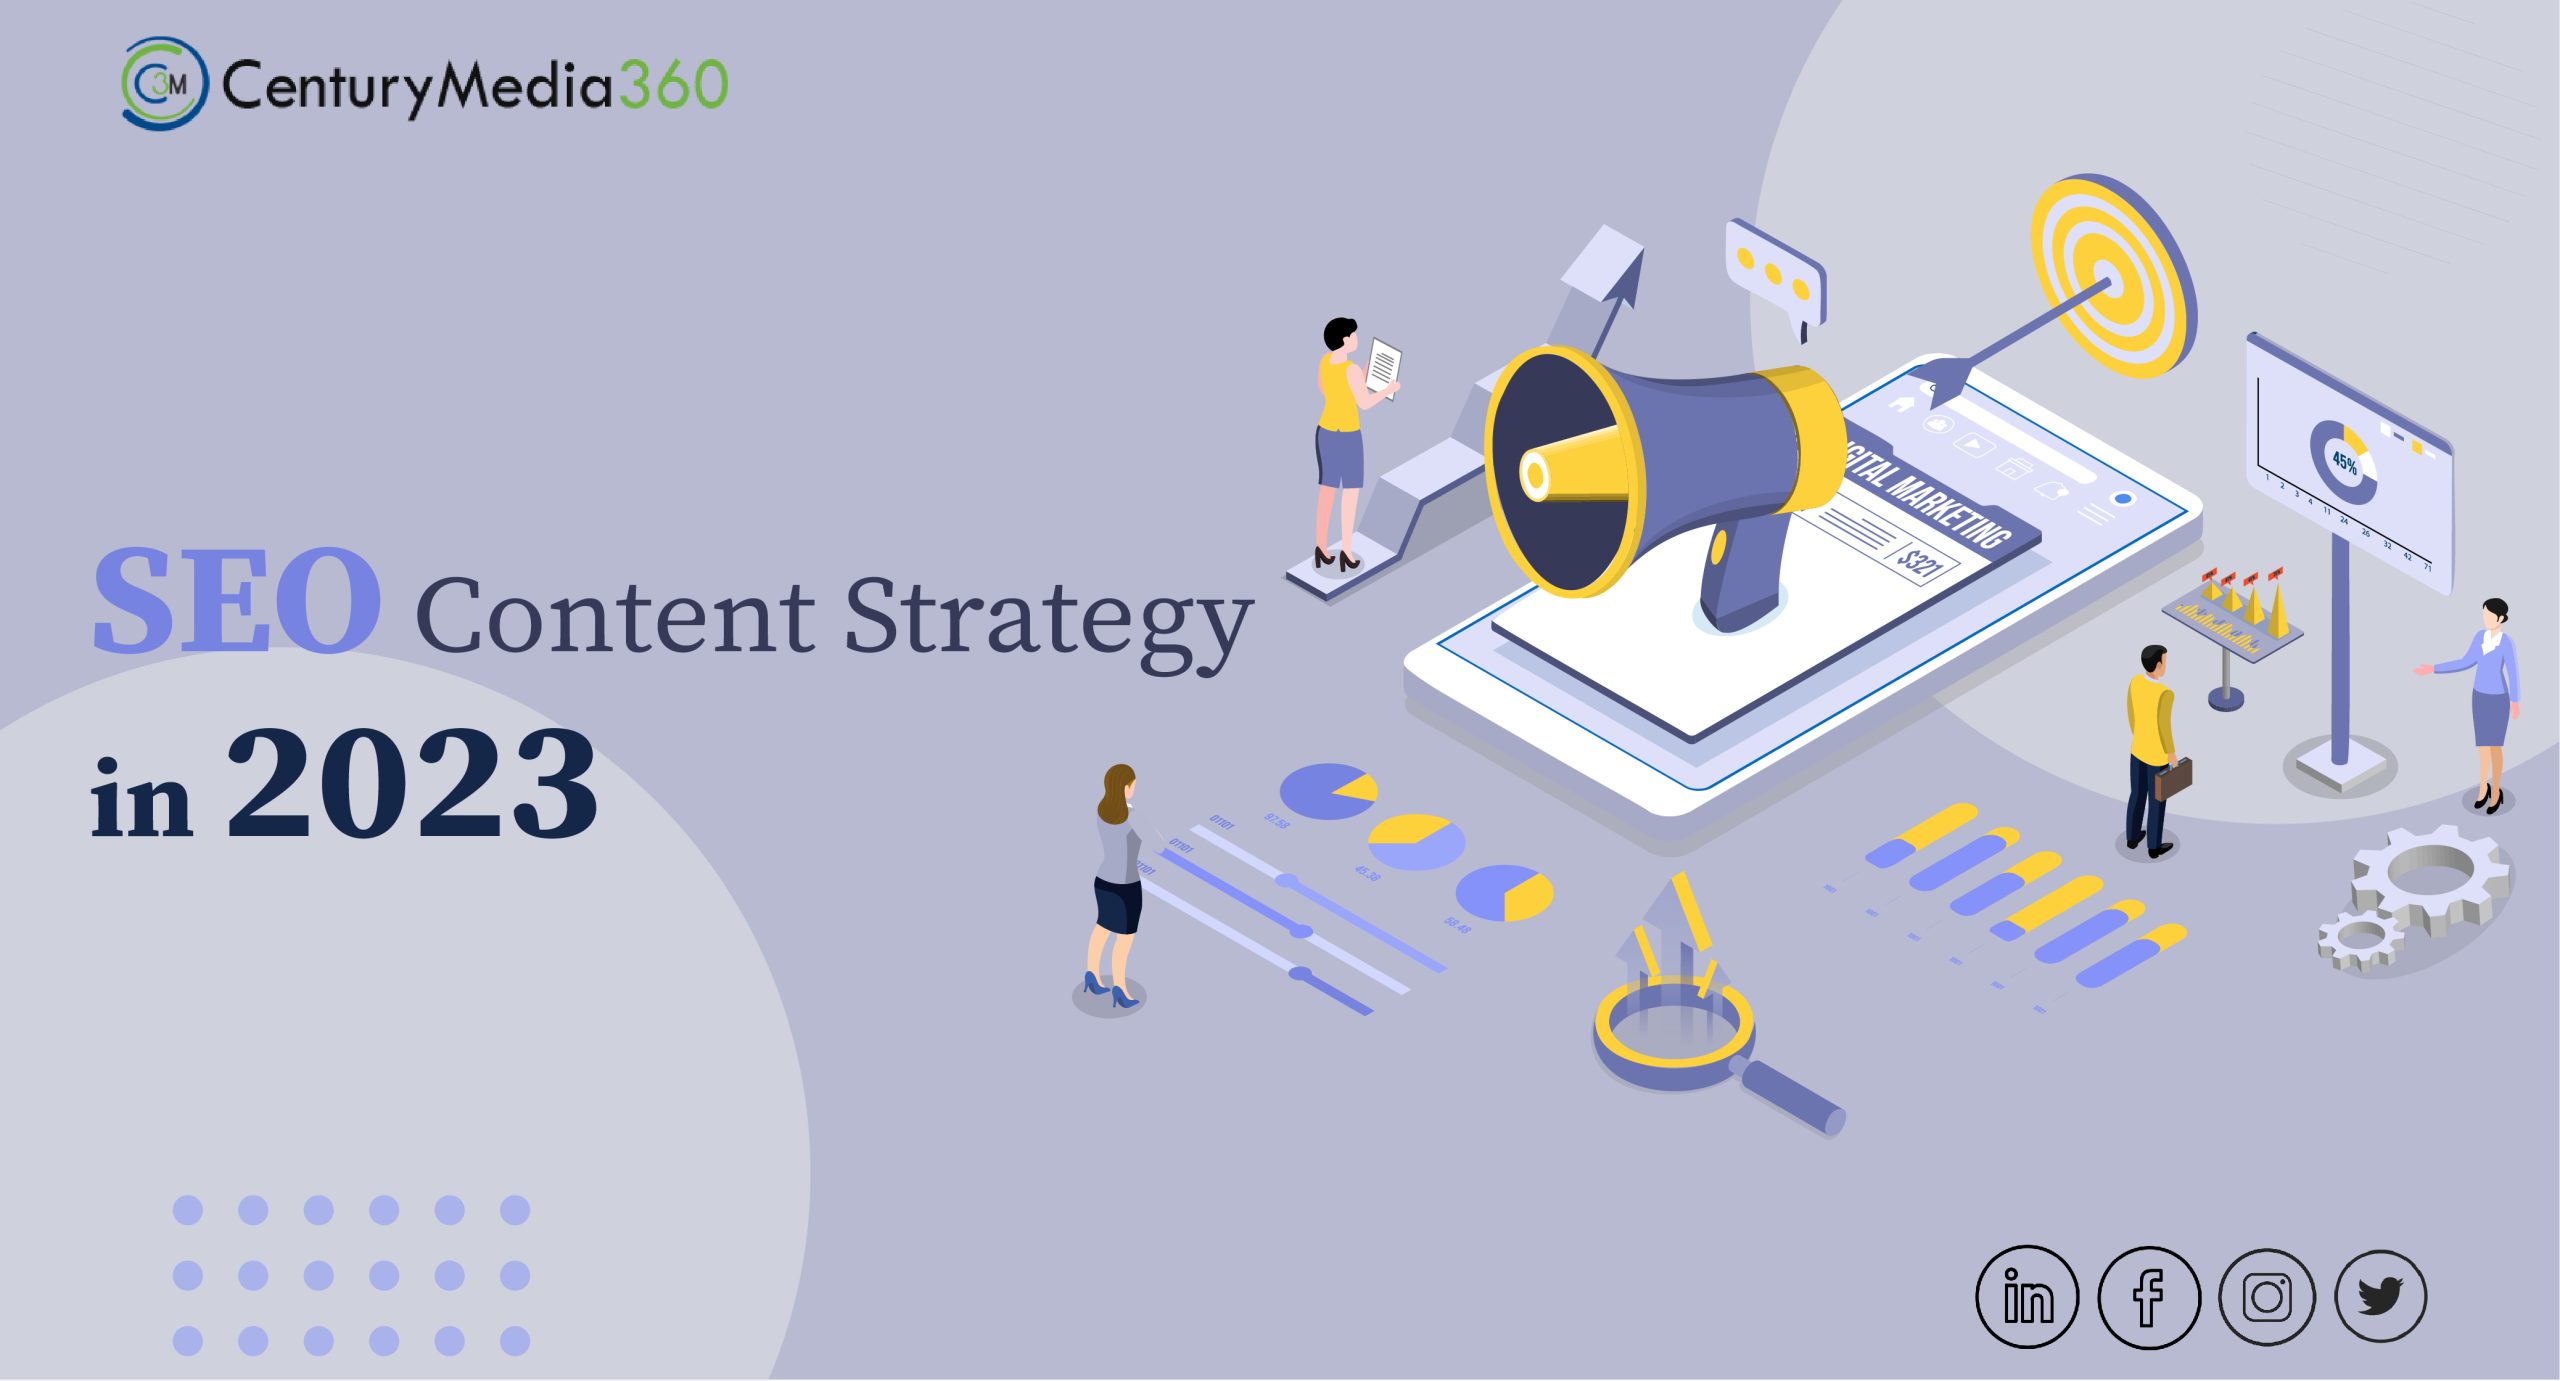 SEO Content Strategy in 2023